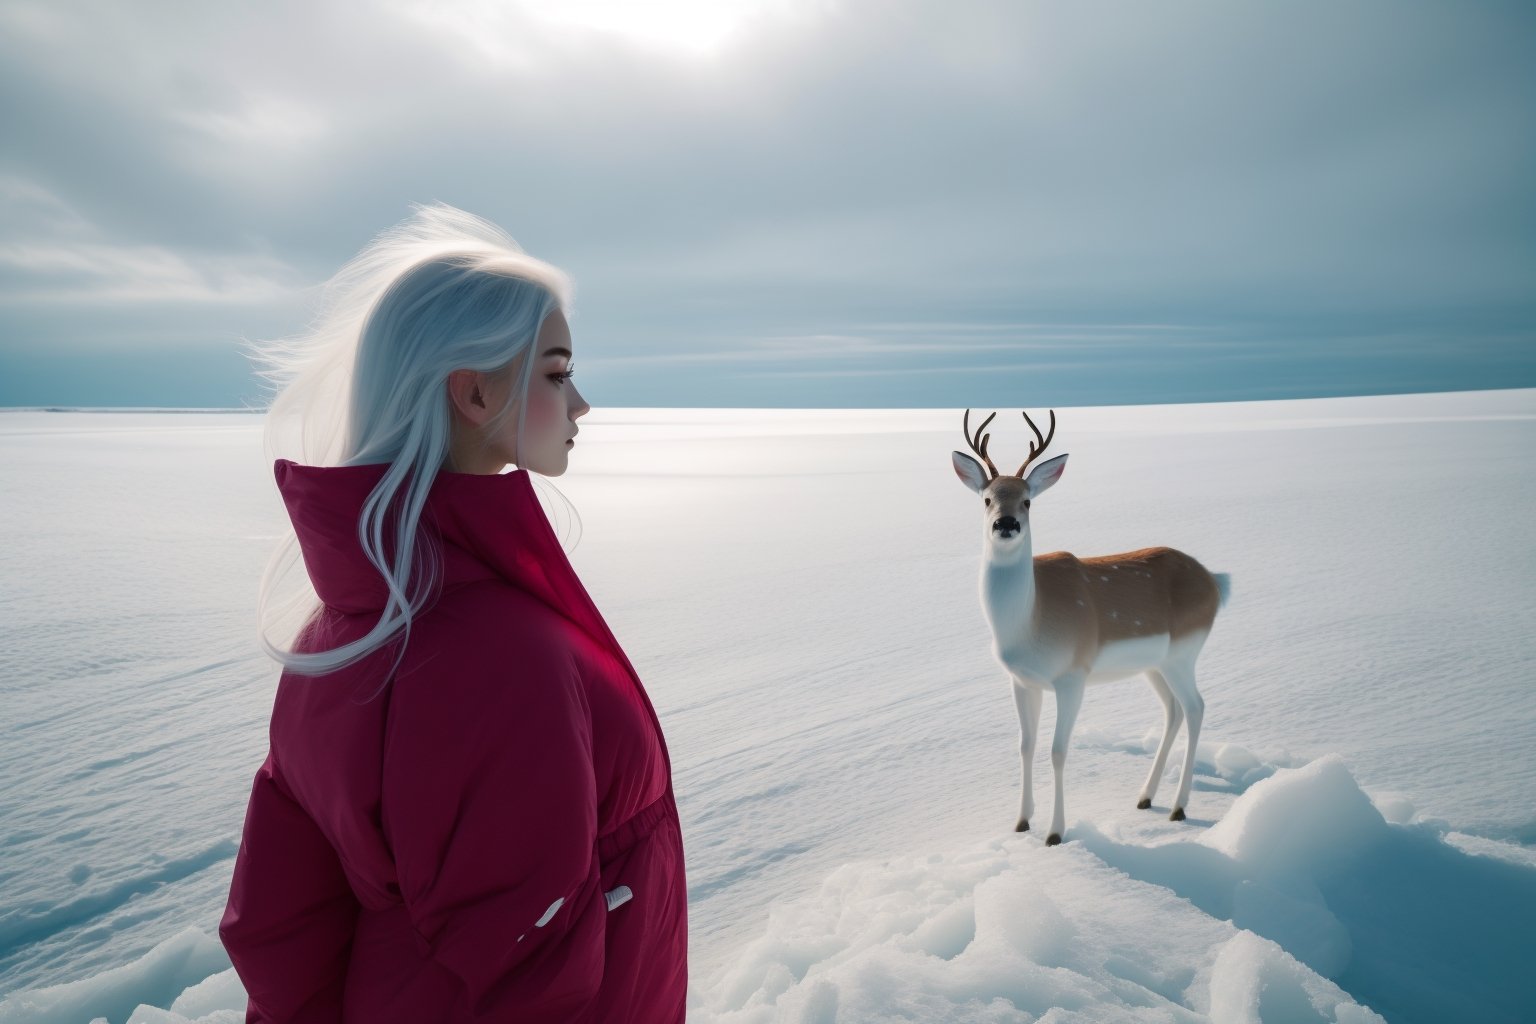 1girl,1 deer, white deer, white girl, white hair,white clothes, cold, ice, wide view, eery vibe